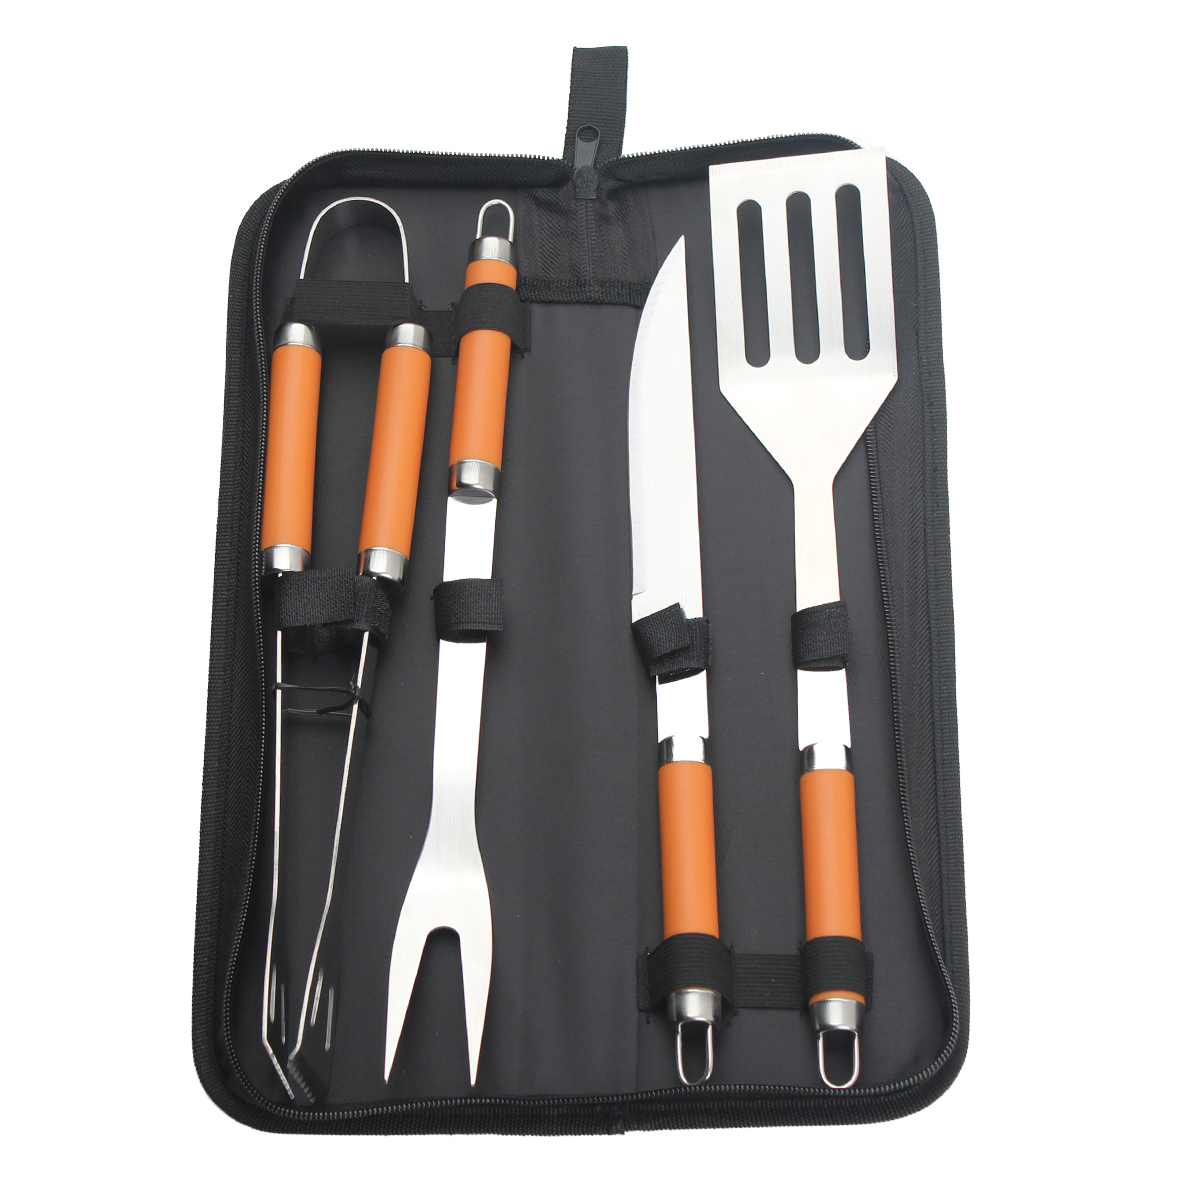 Stainless Steel BBQ tools w/black bag